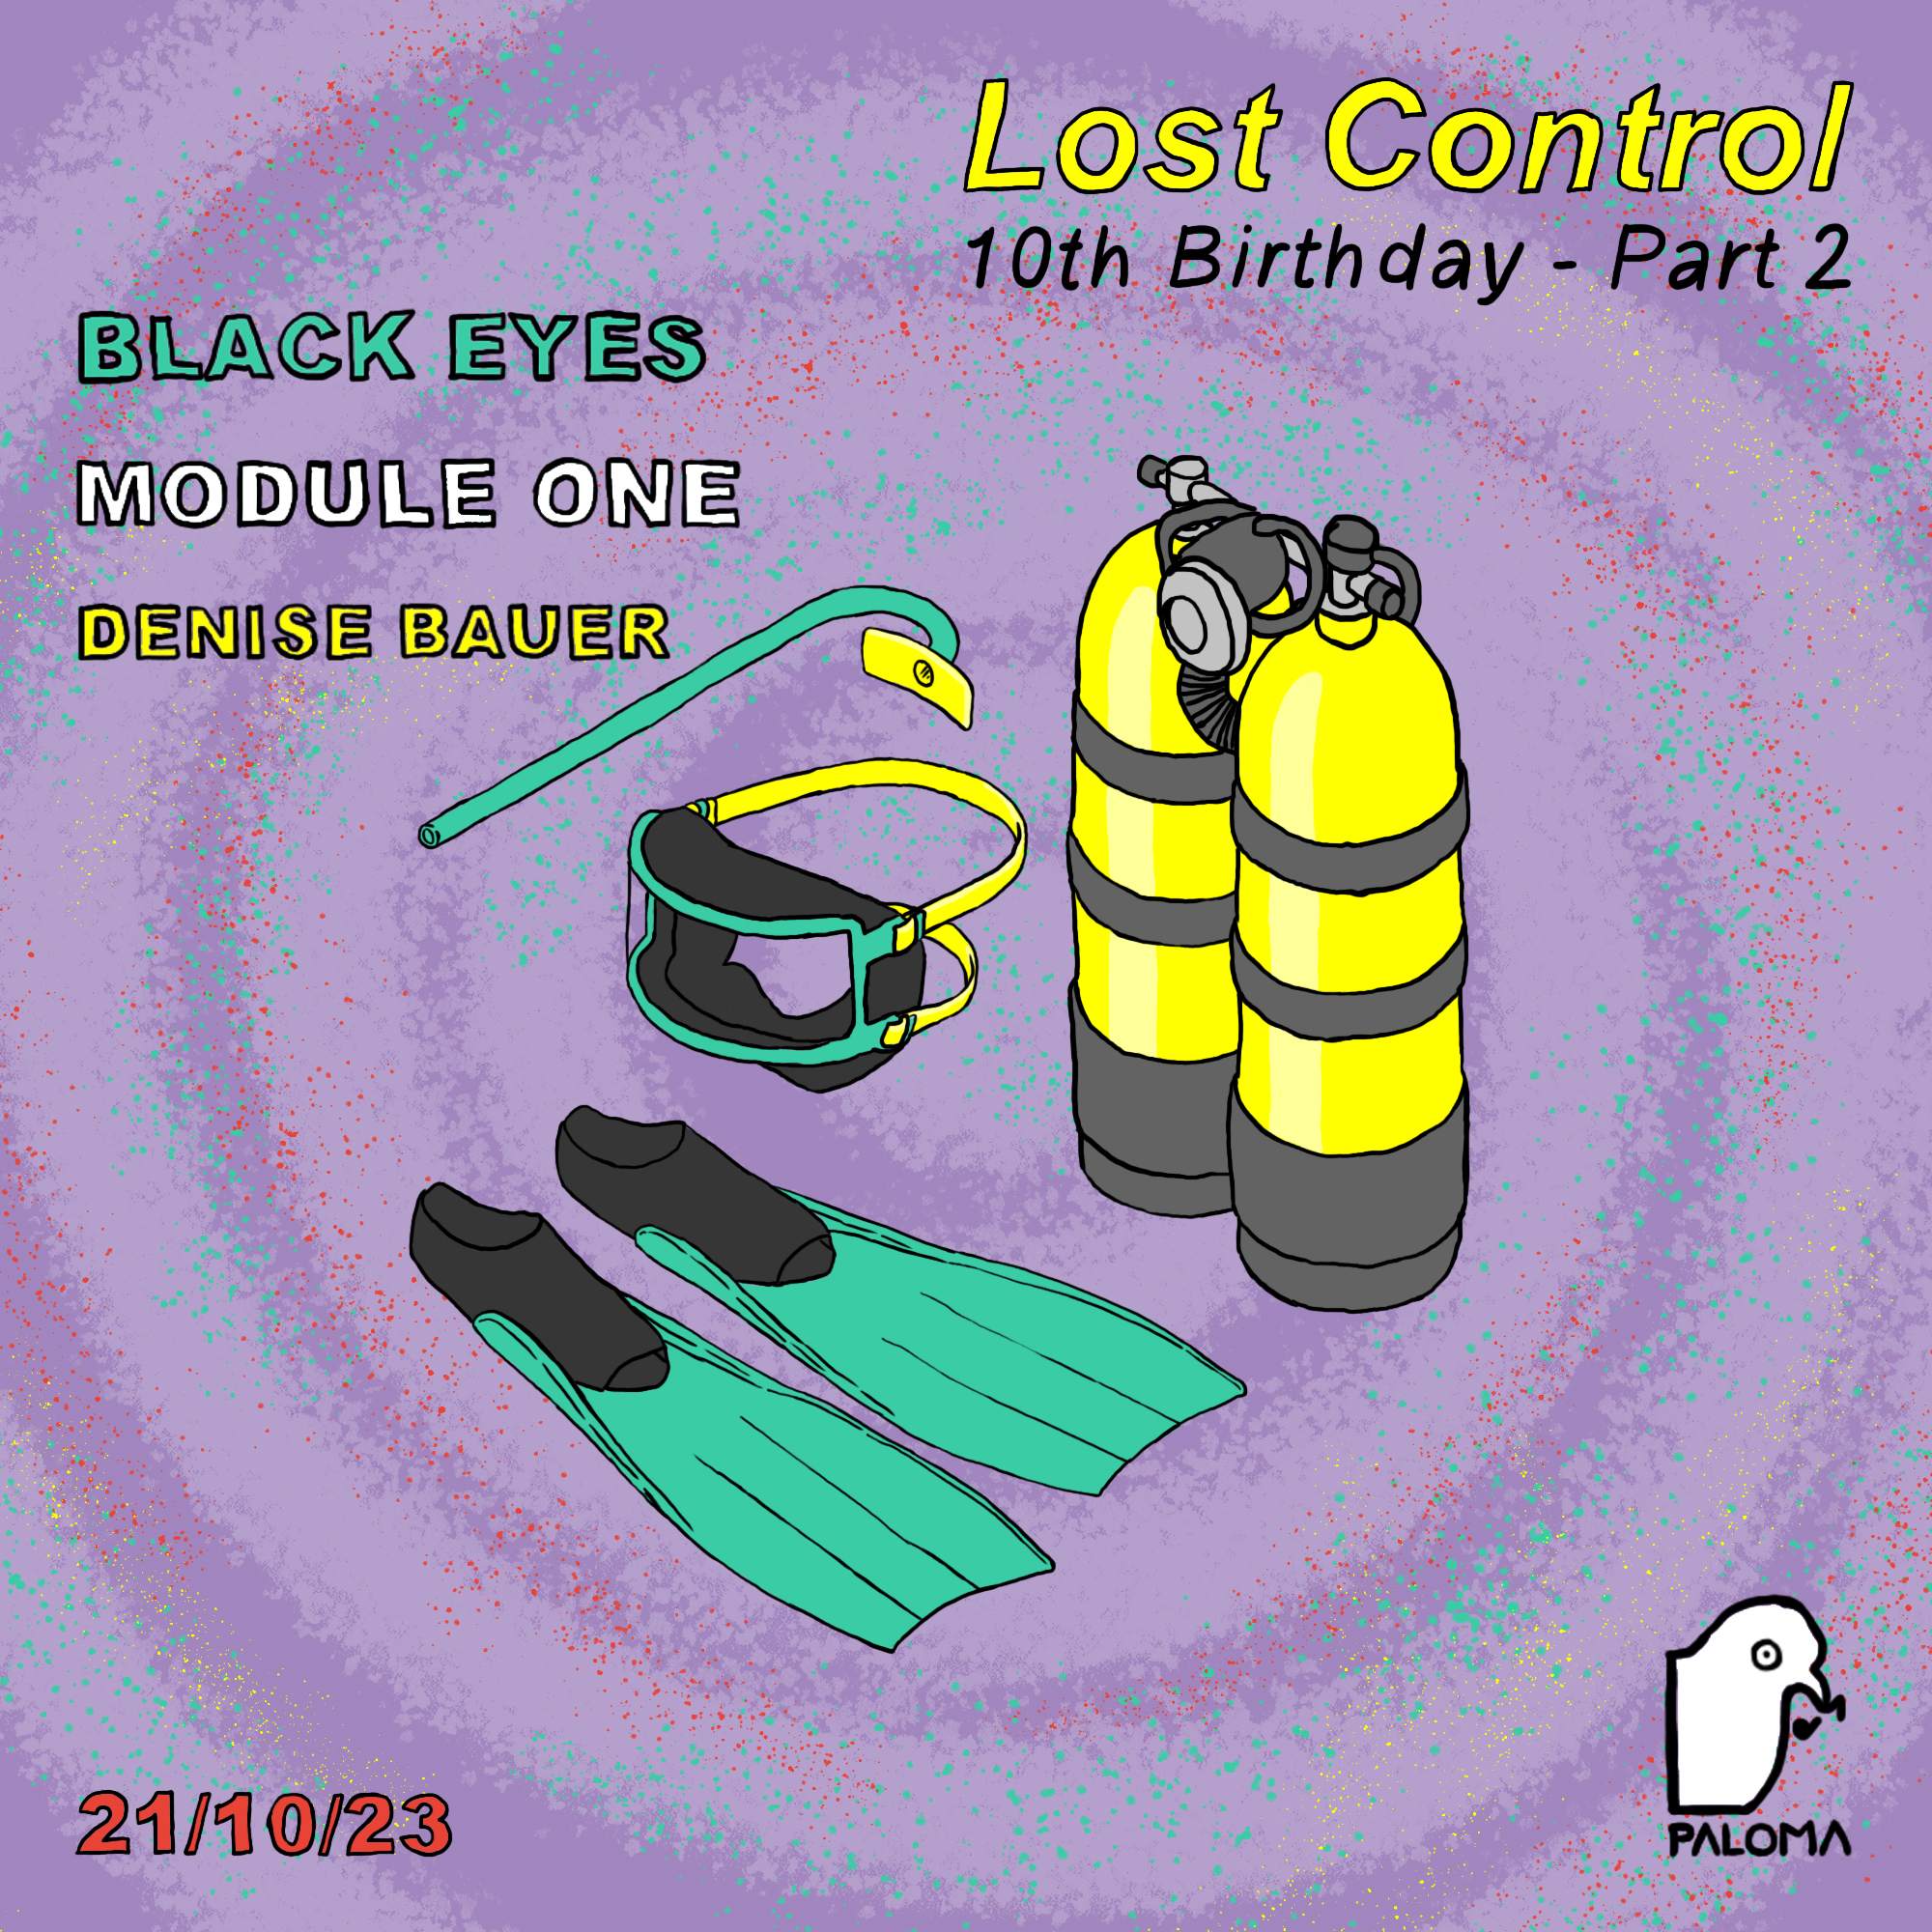 Lost Control 10th Birthday - Part 2 with Black Eyes, Module One + Denise Bauer - フライヤー表